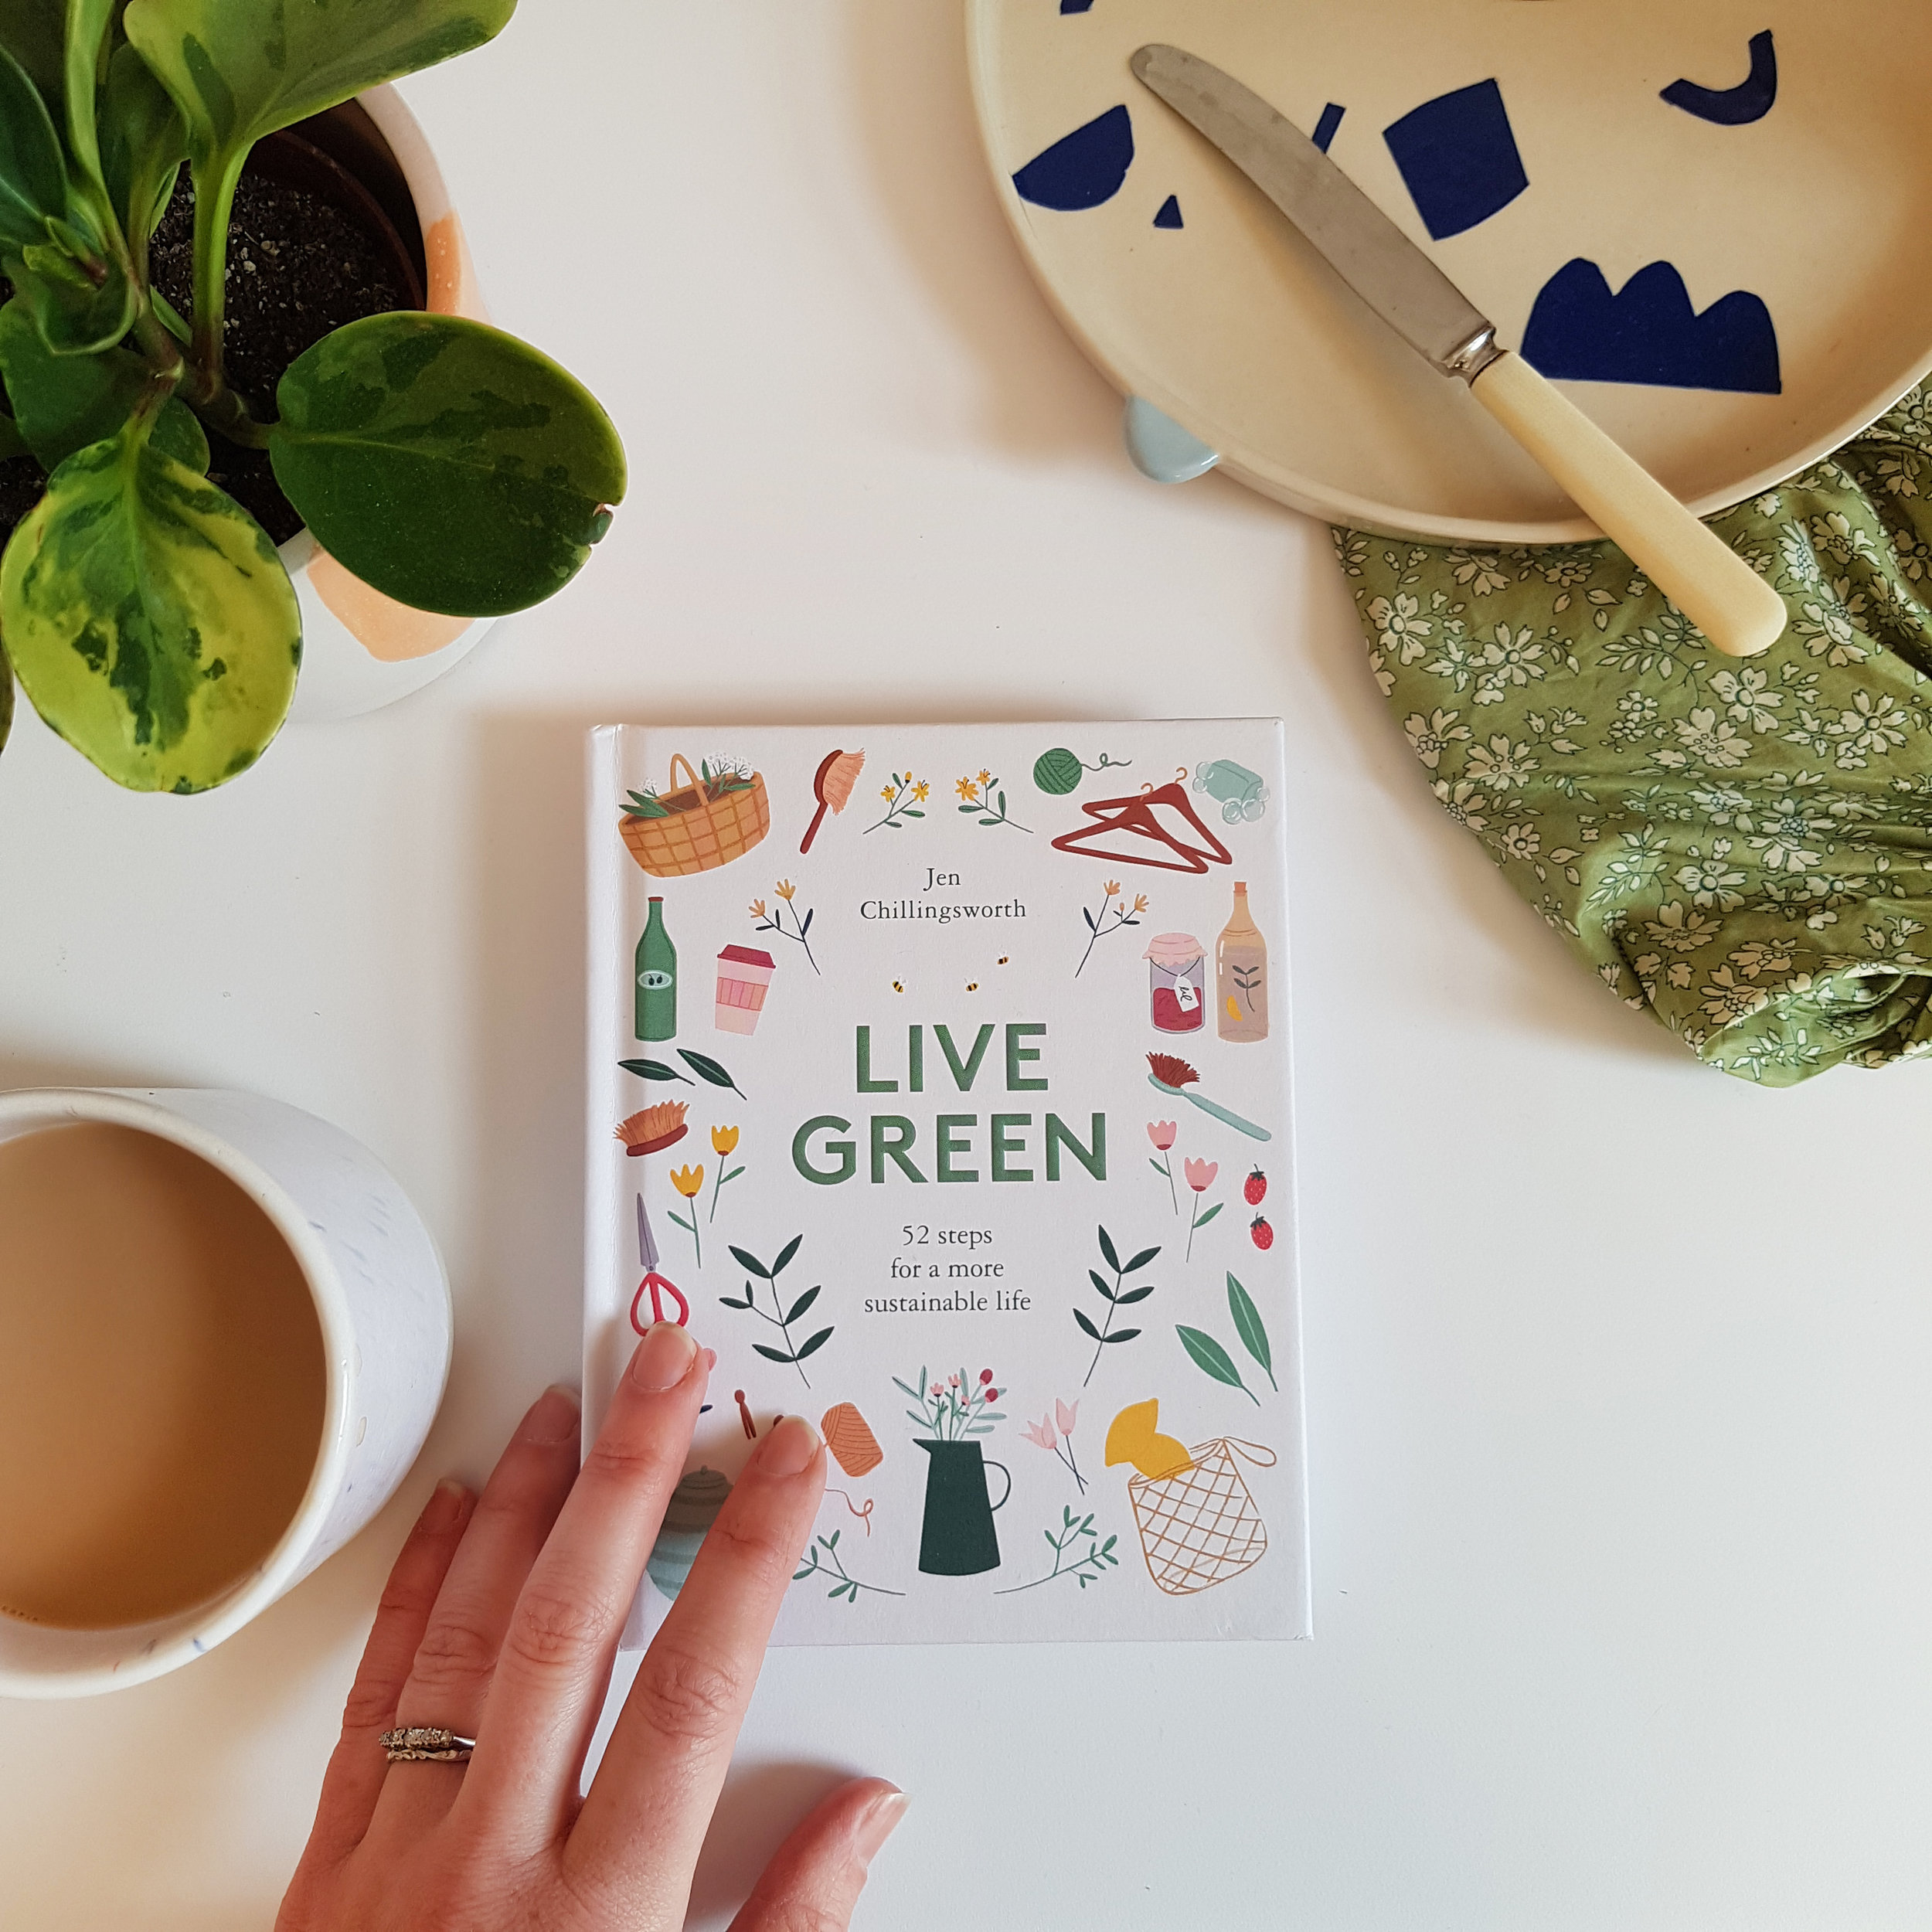 Live Green by Jen Chillingsworth - review by 91 Magazine